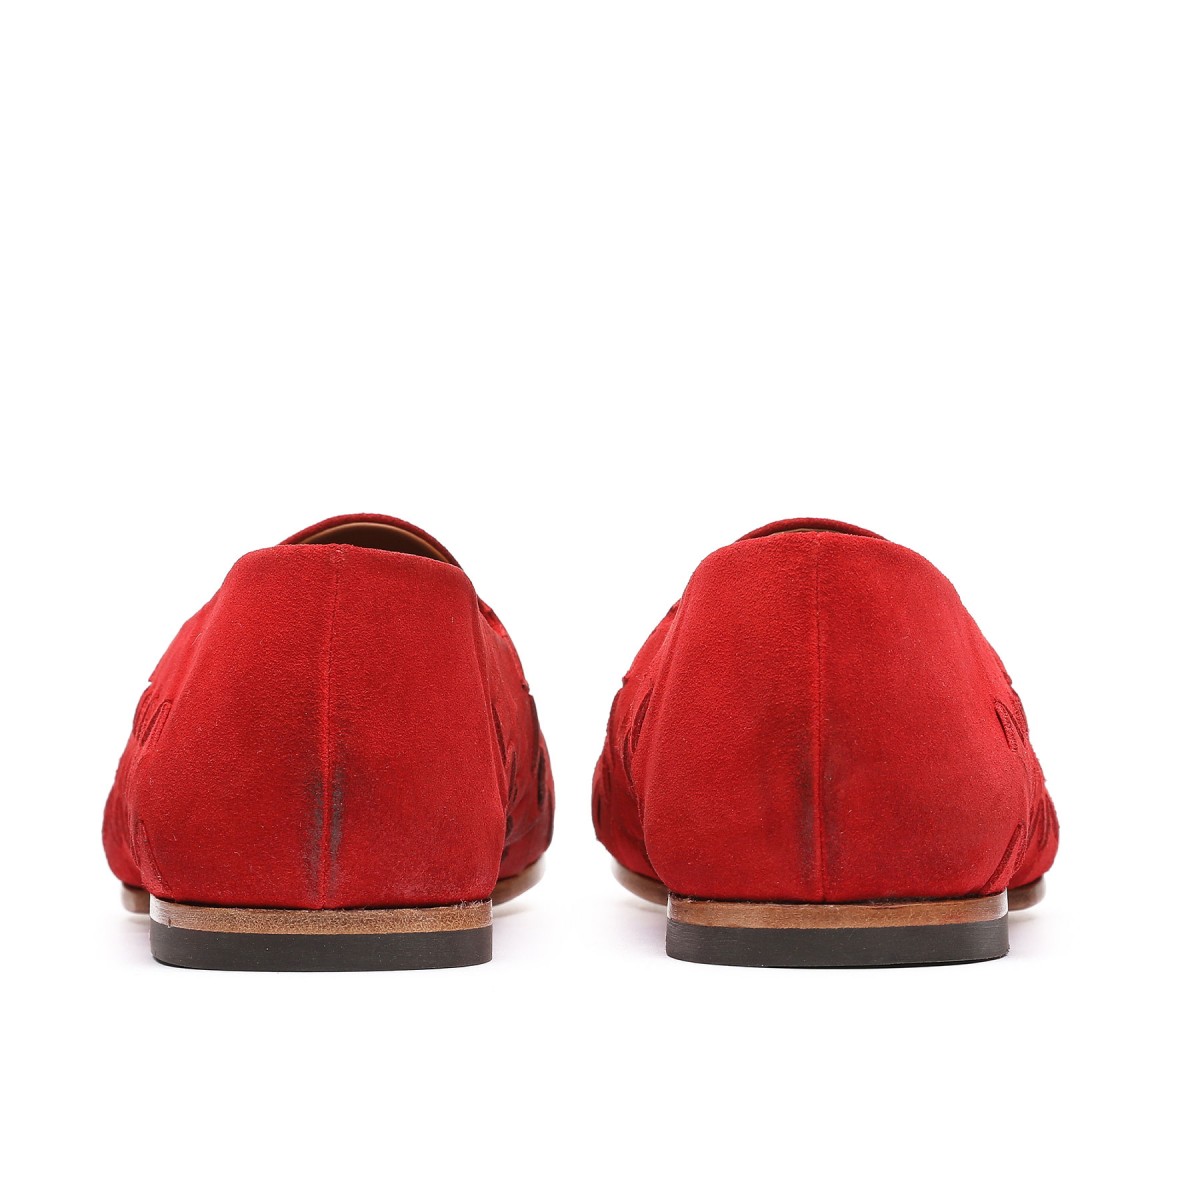 Red suede leather loafers